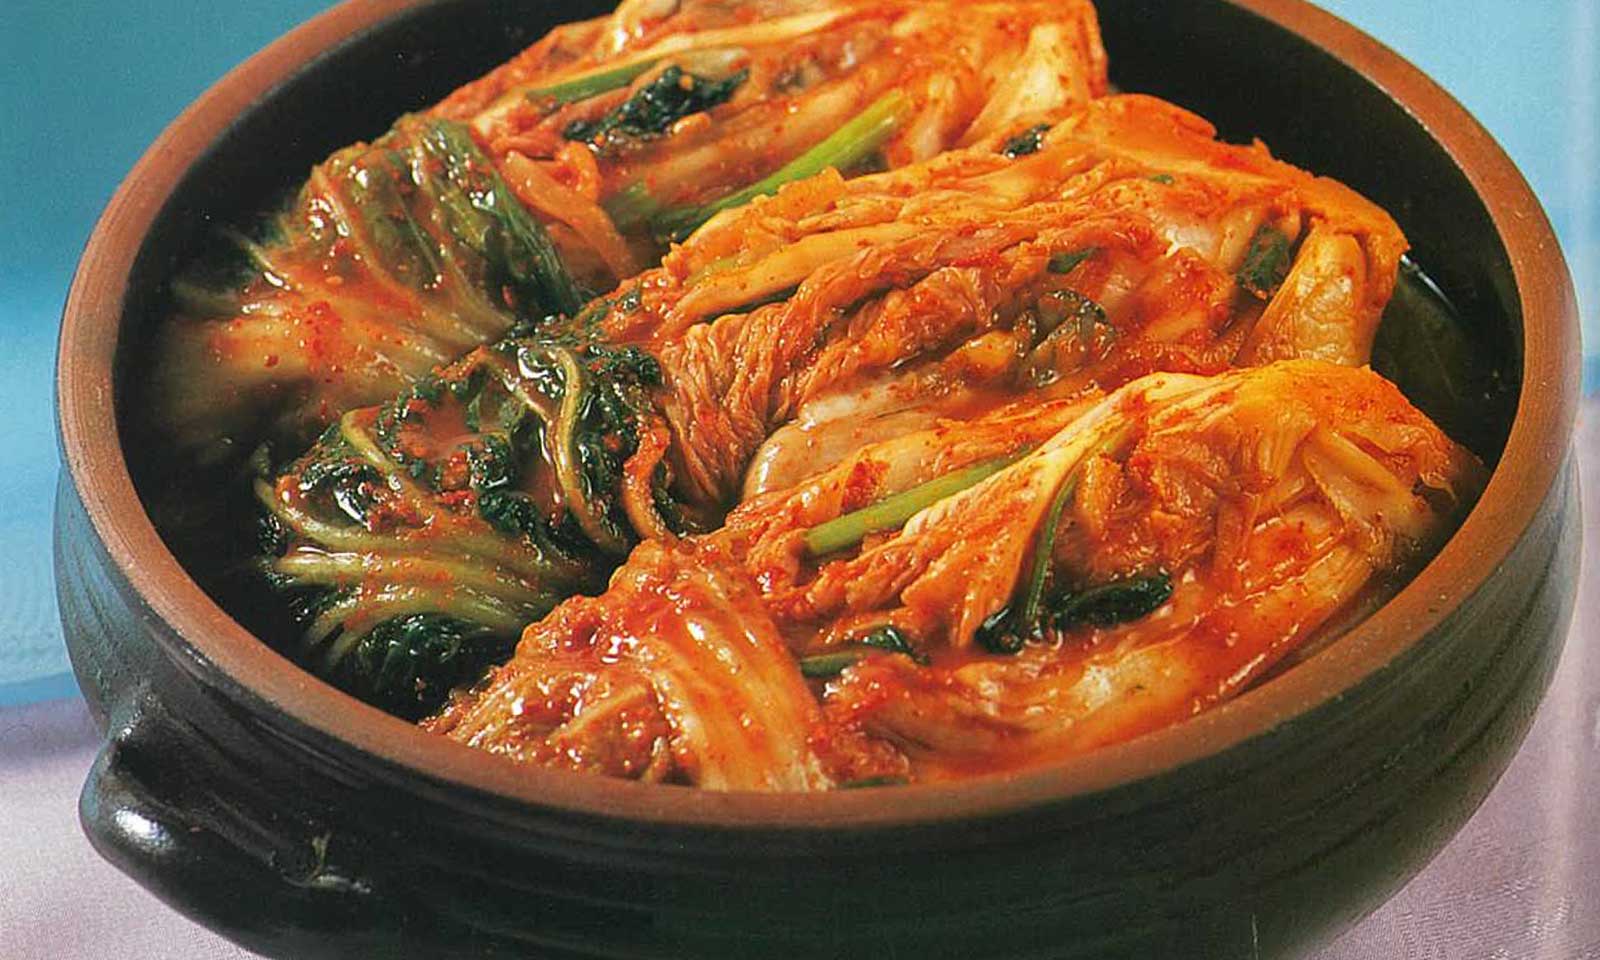 Special Event: Kimjang, making and sharing Kimchi Experience – Festive